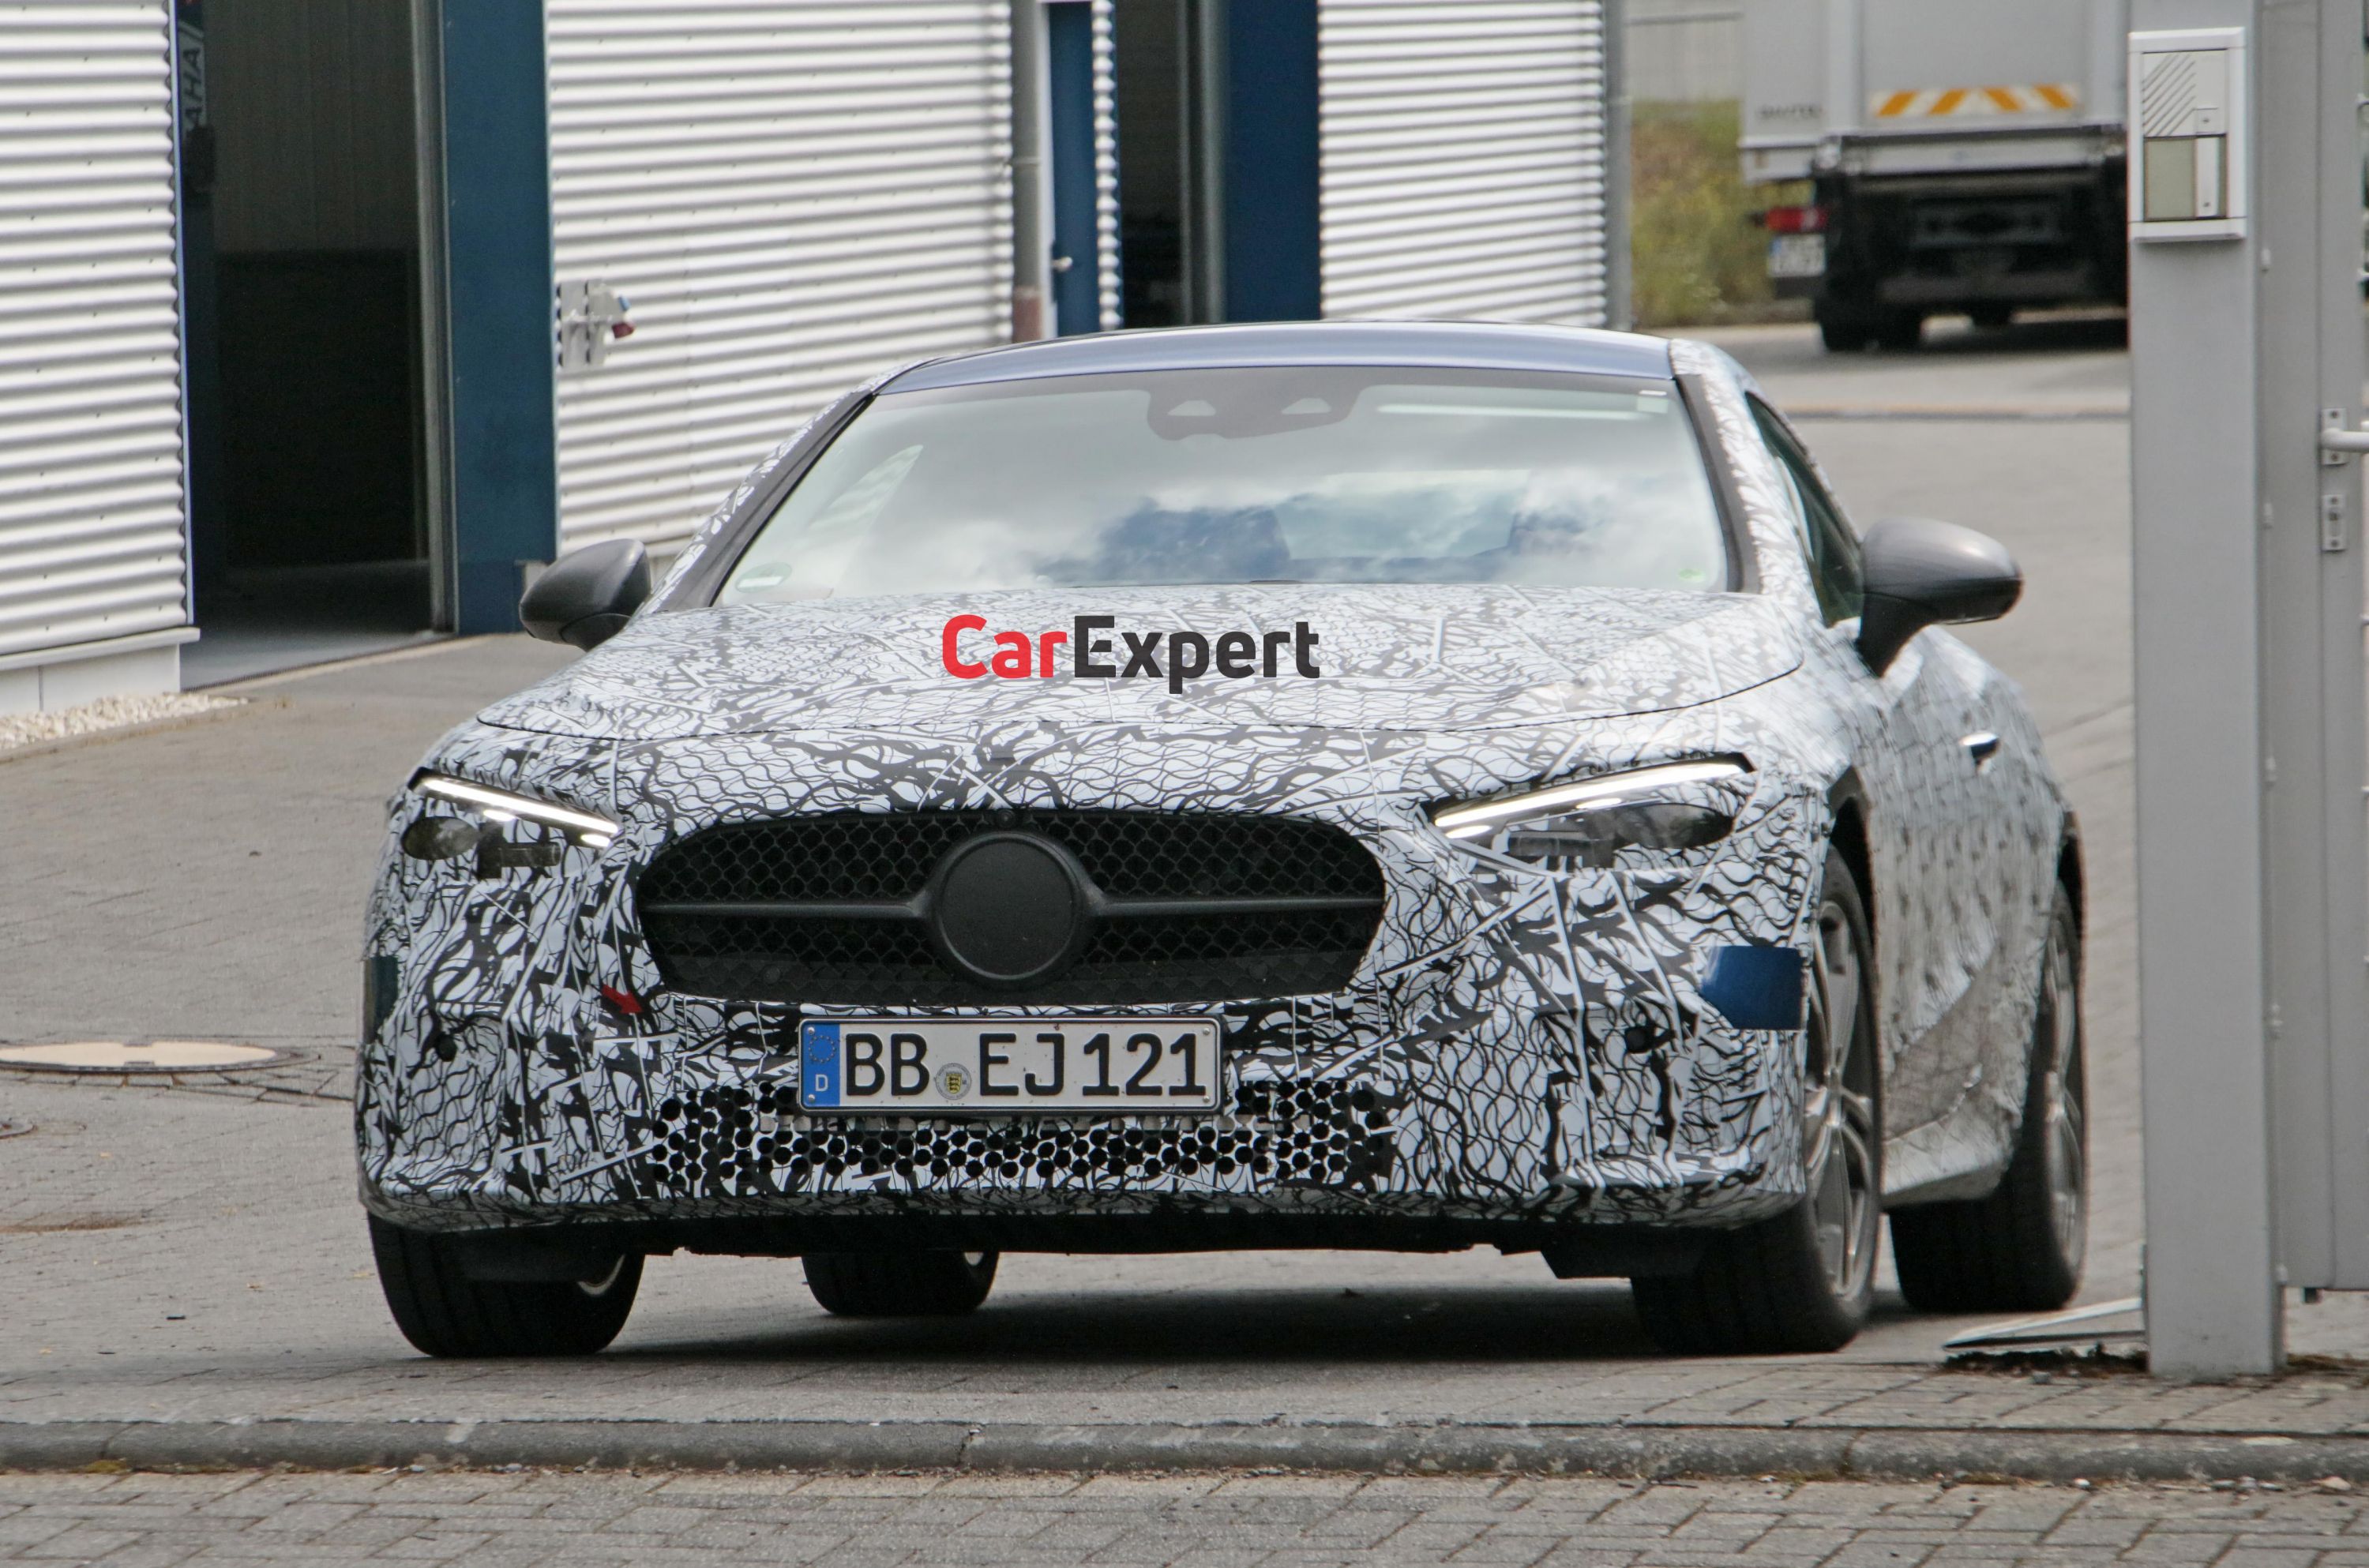 All-New 2022 Mercedes-Benz C-Class Gets Leaked a Day Early